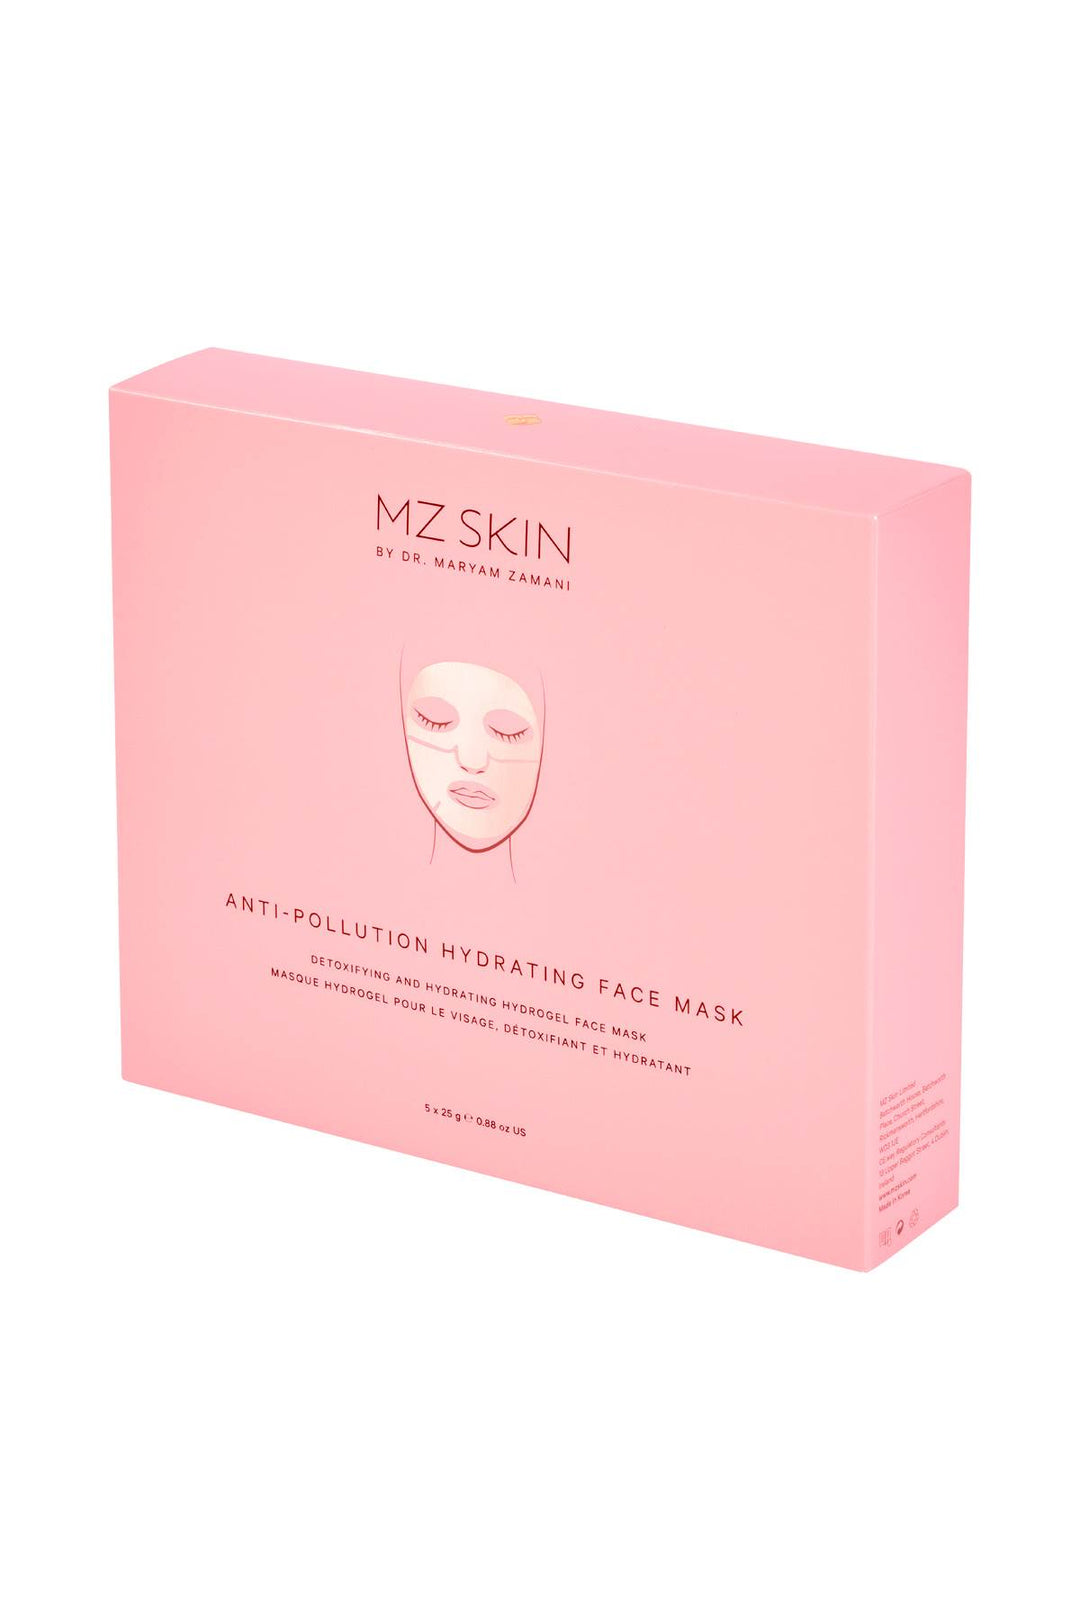 Mz skin anti-pollution hydrating face mask-0